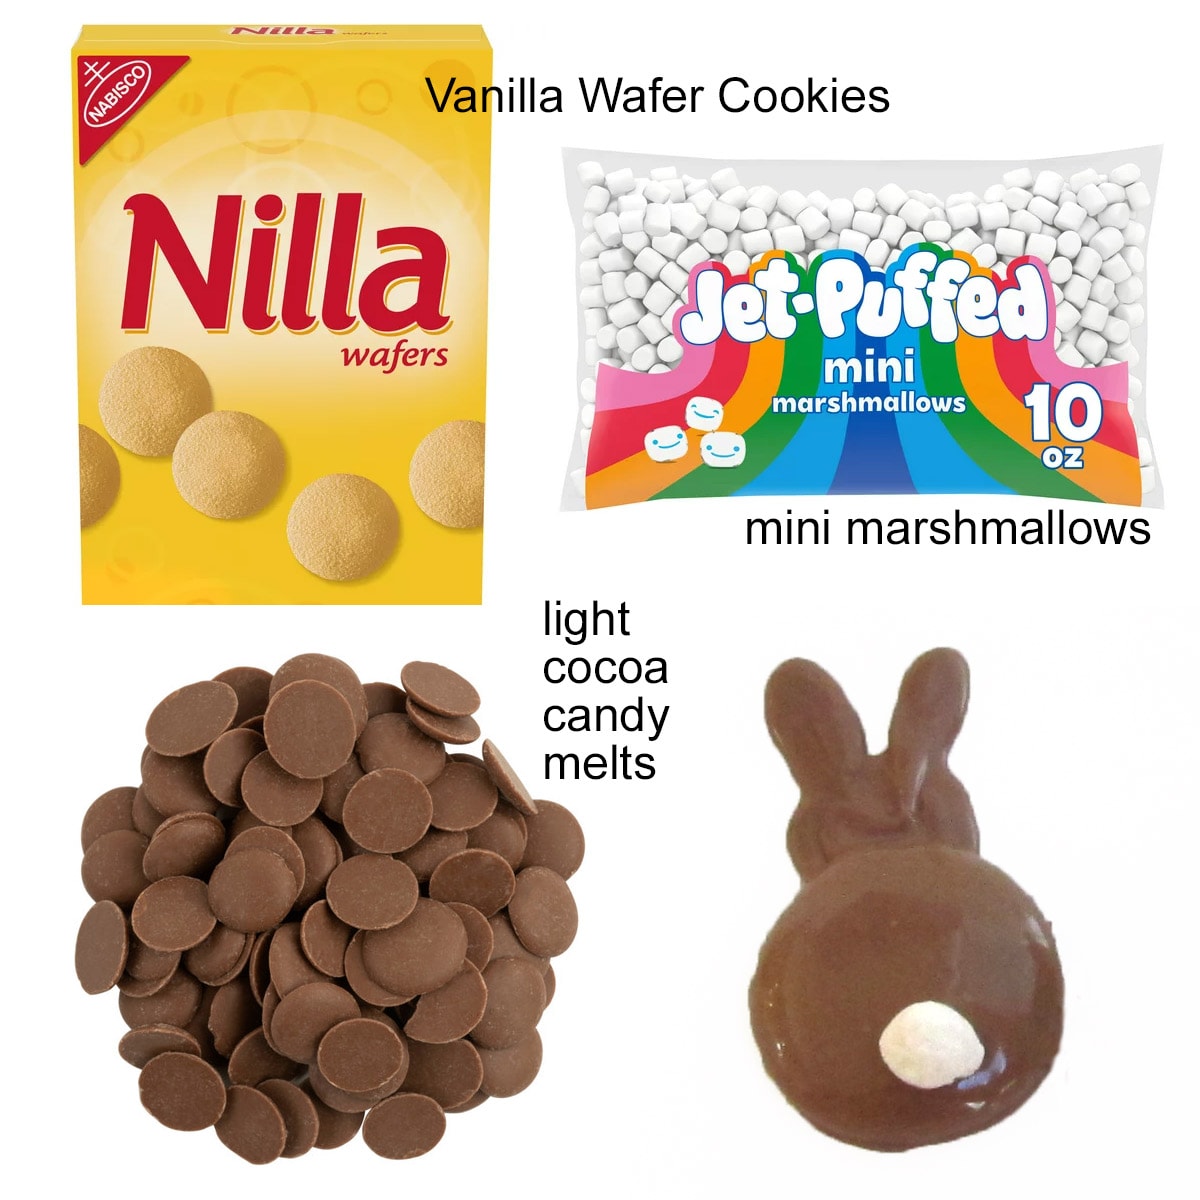 chocolate-dipped bunny cookies ingredients including vanilla wafers, mini marshmallows, and light cocoa candy melts.